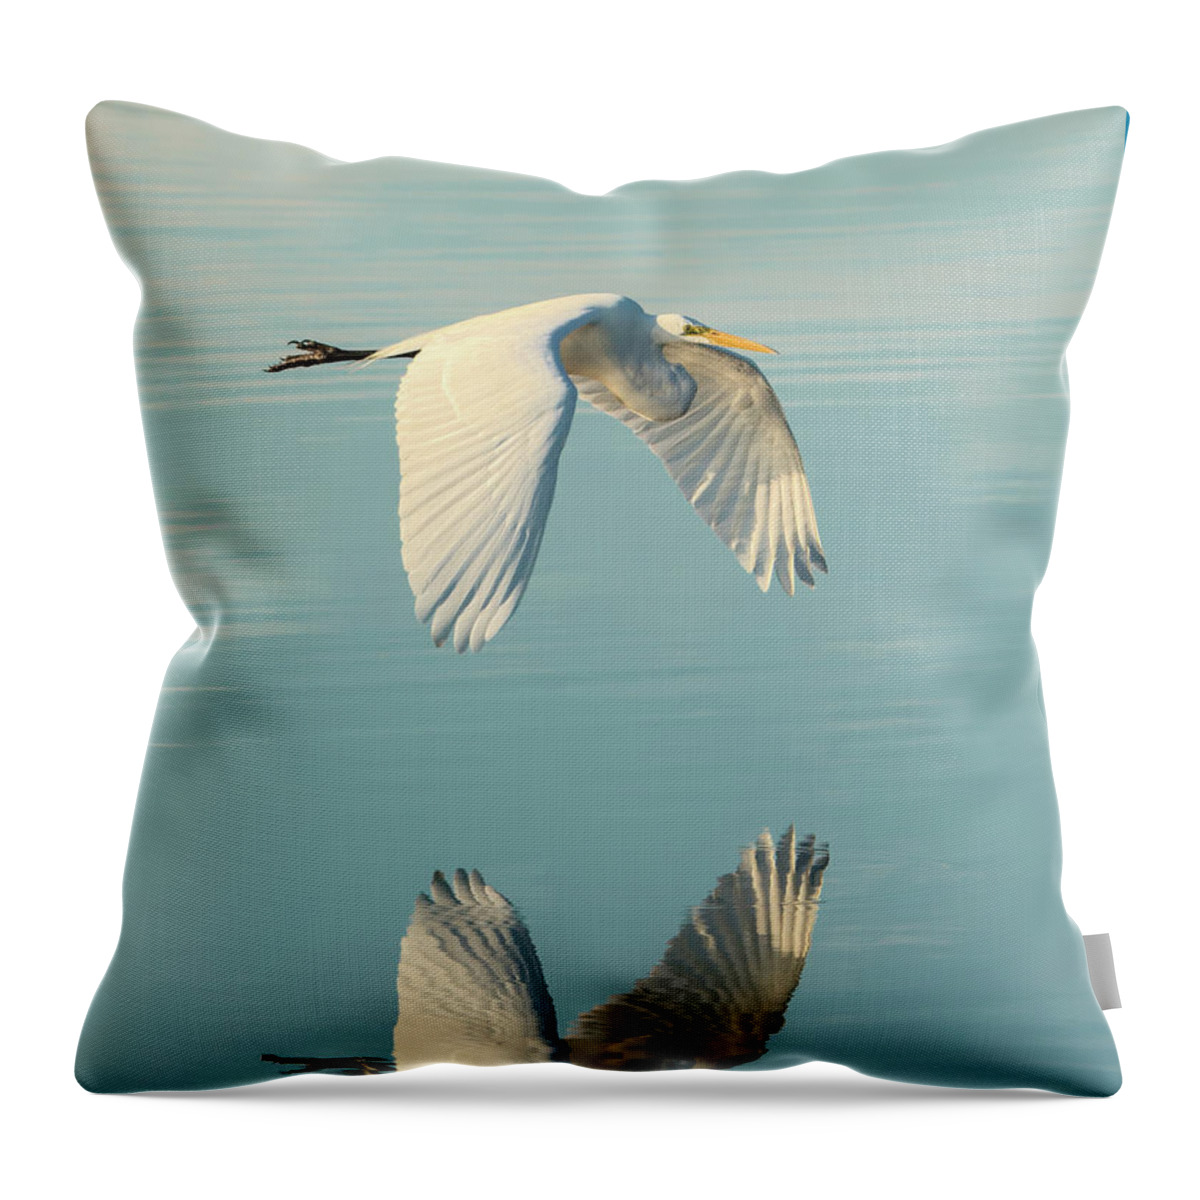 Bird Throw Pillow featuring the photograph Nature's Mirror by Artful Imagery